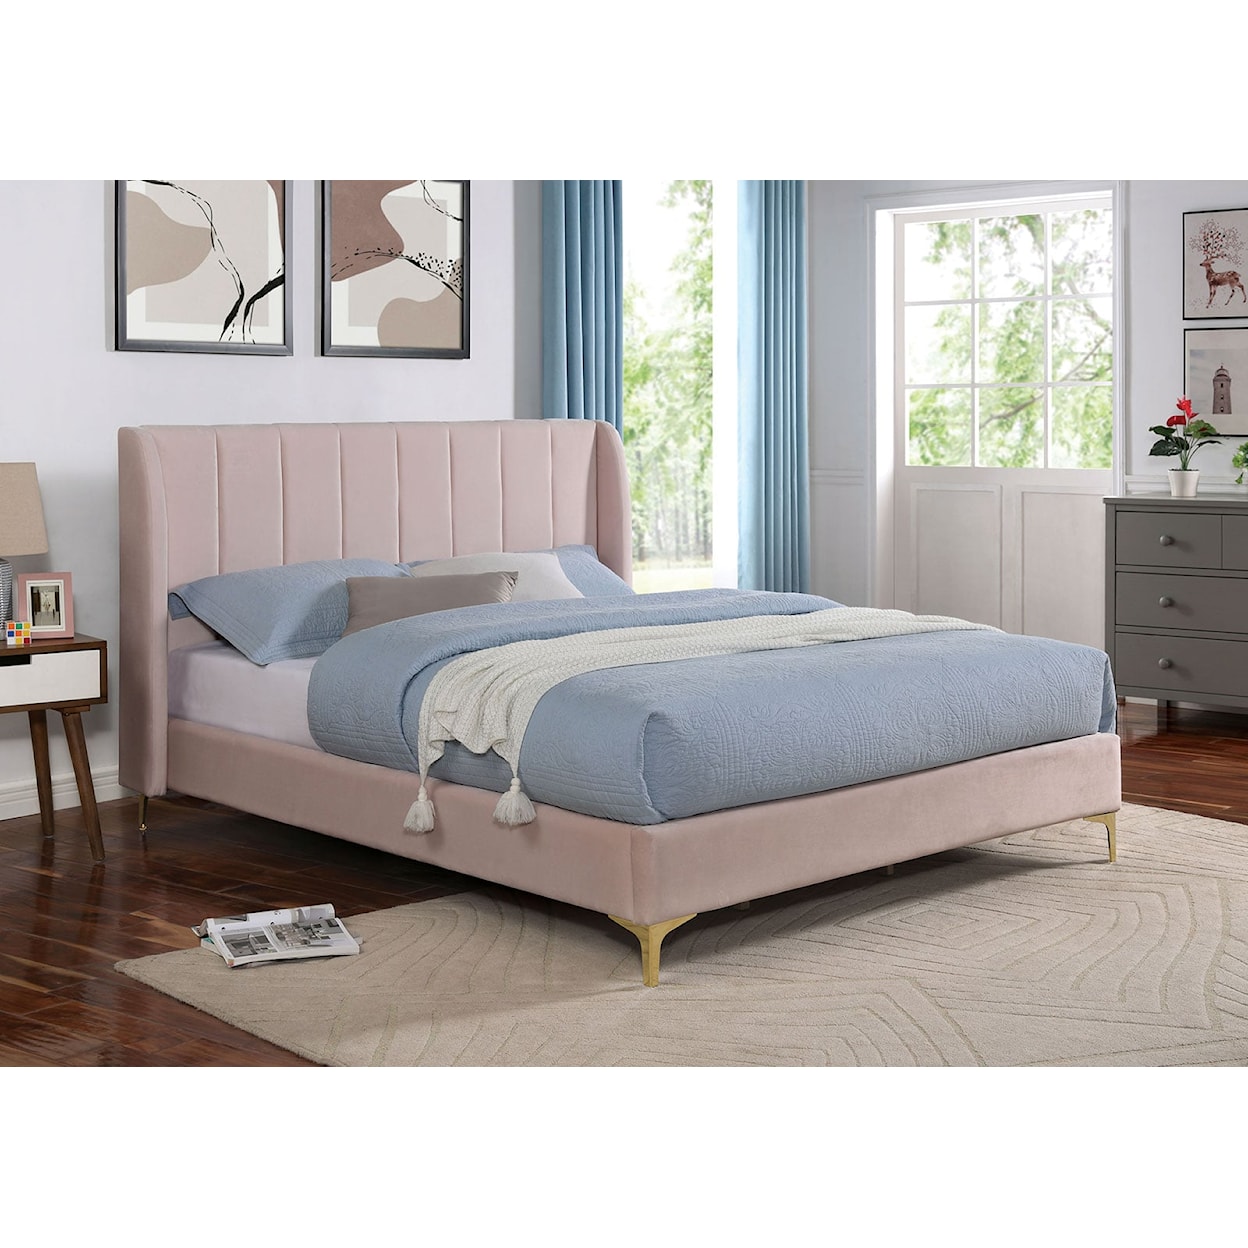 Furniture of America Pearl Queen Upholstered Bed